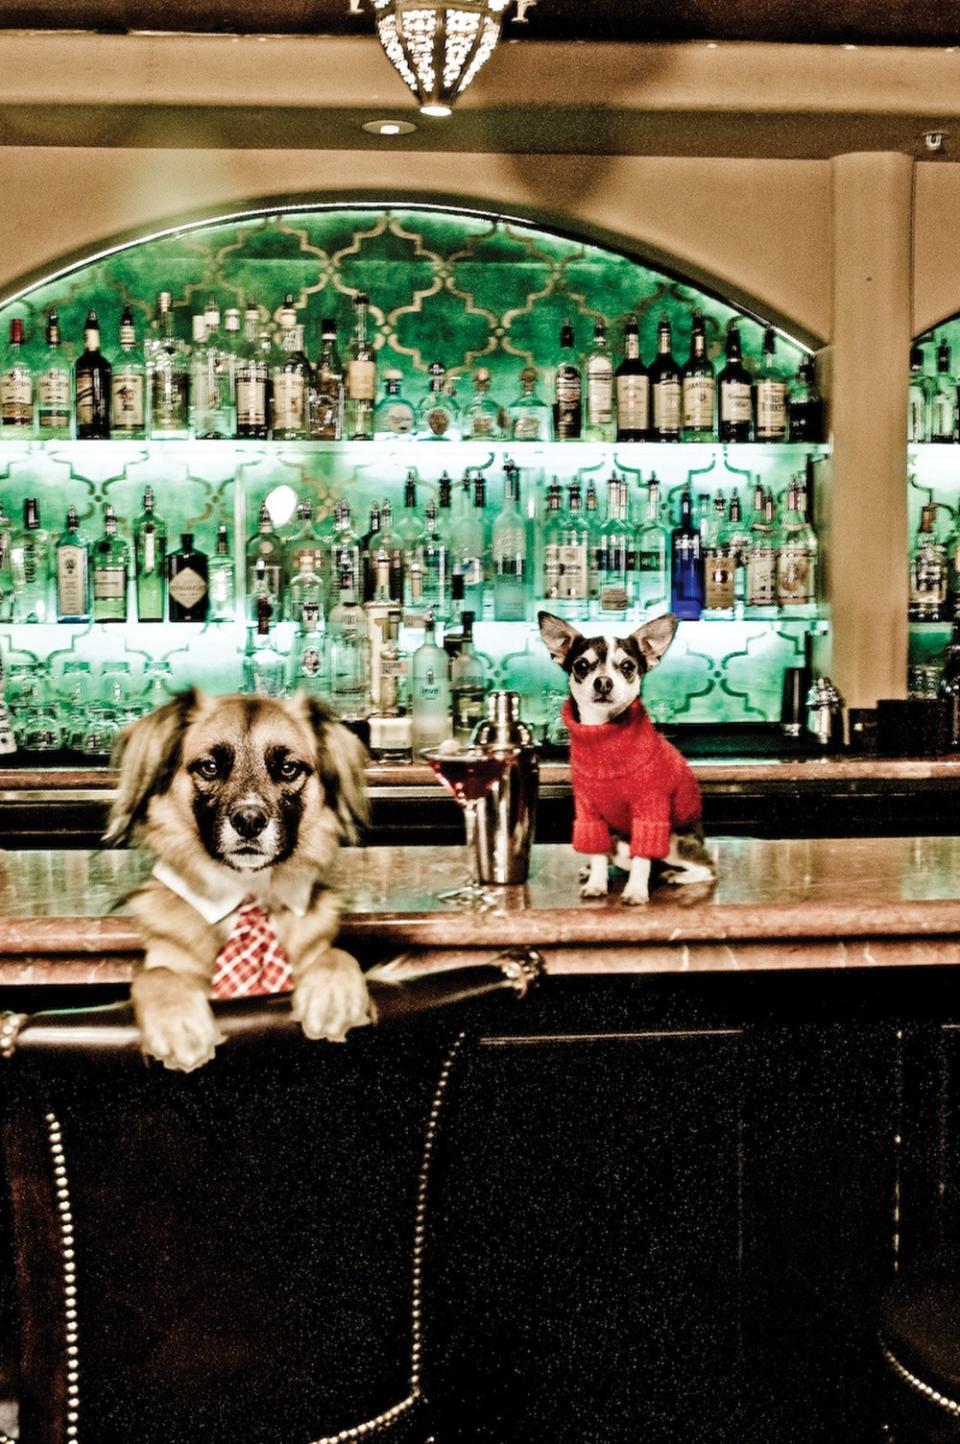 Guests can enjoy Yappy Hour with their pets.